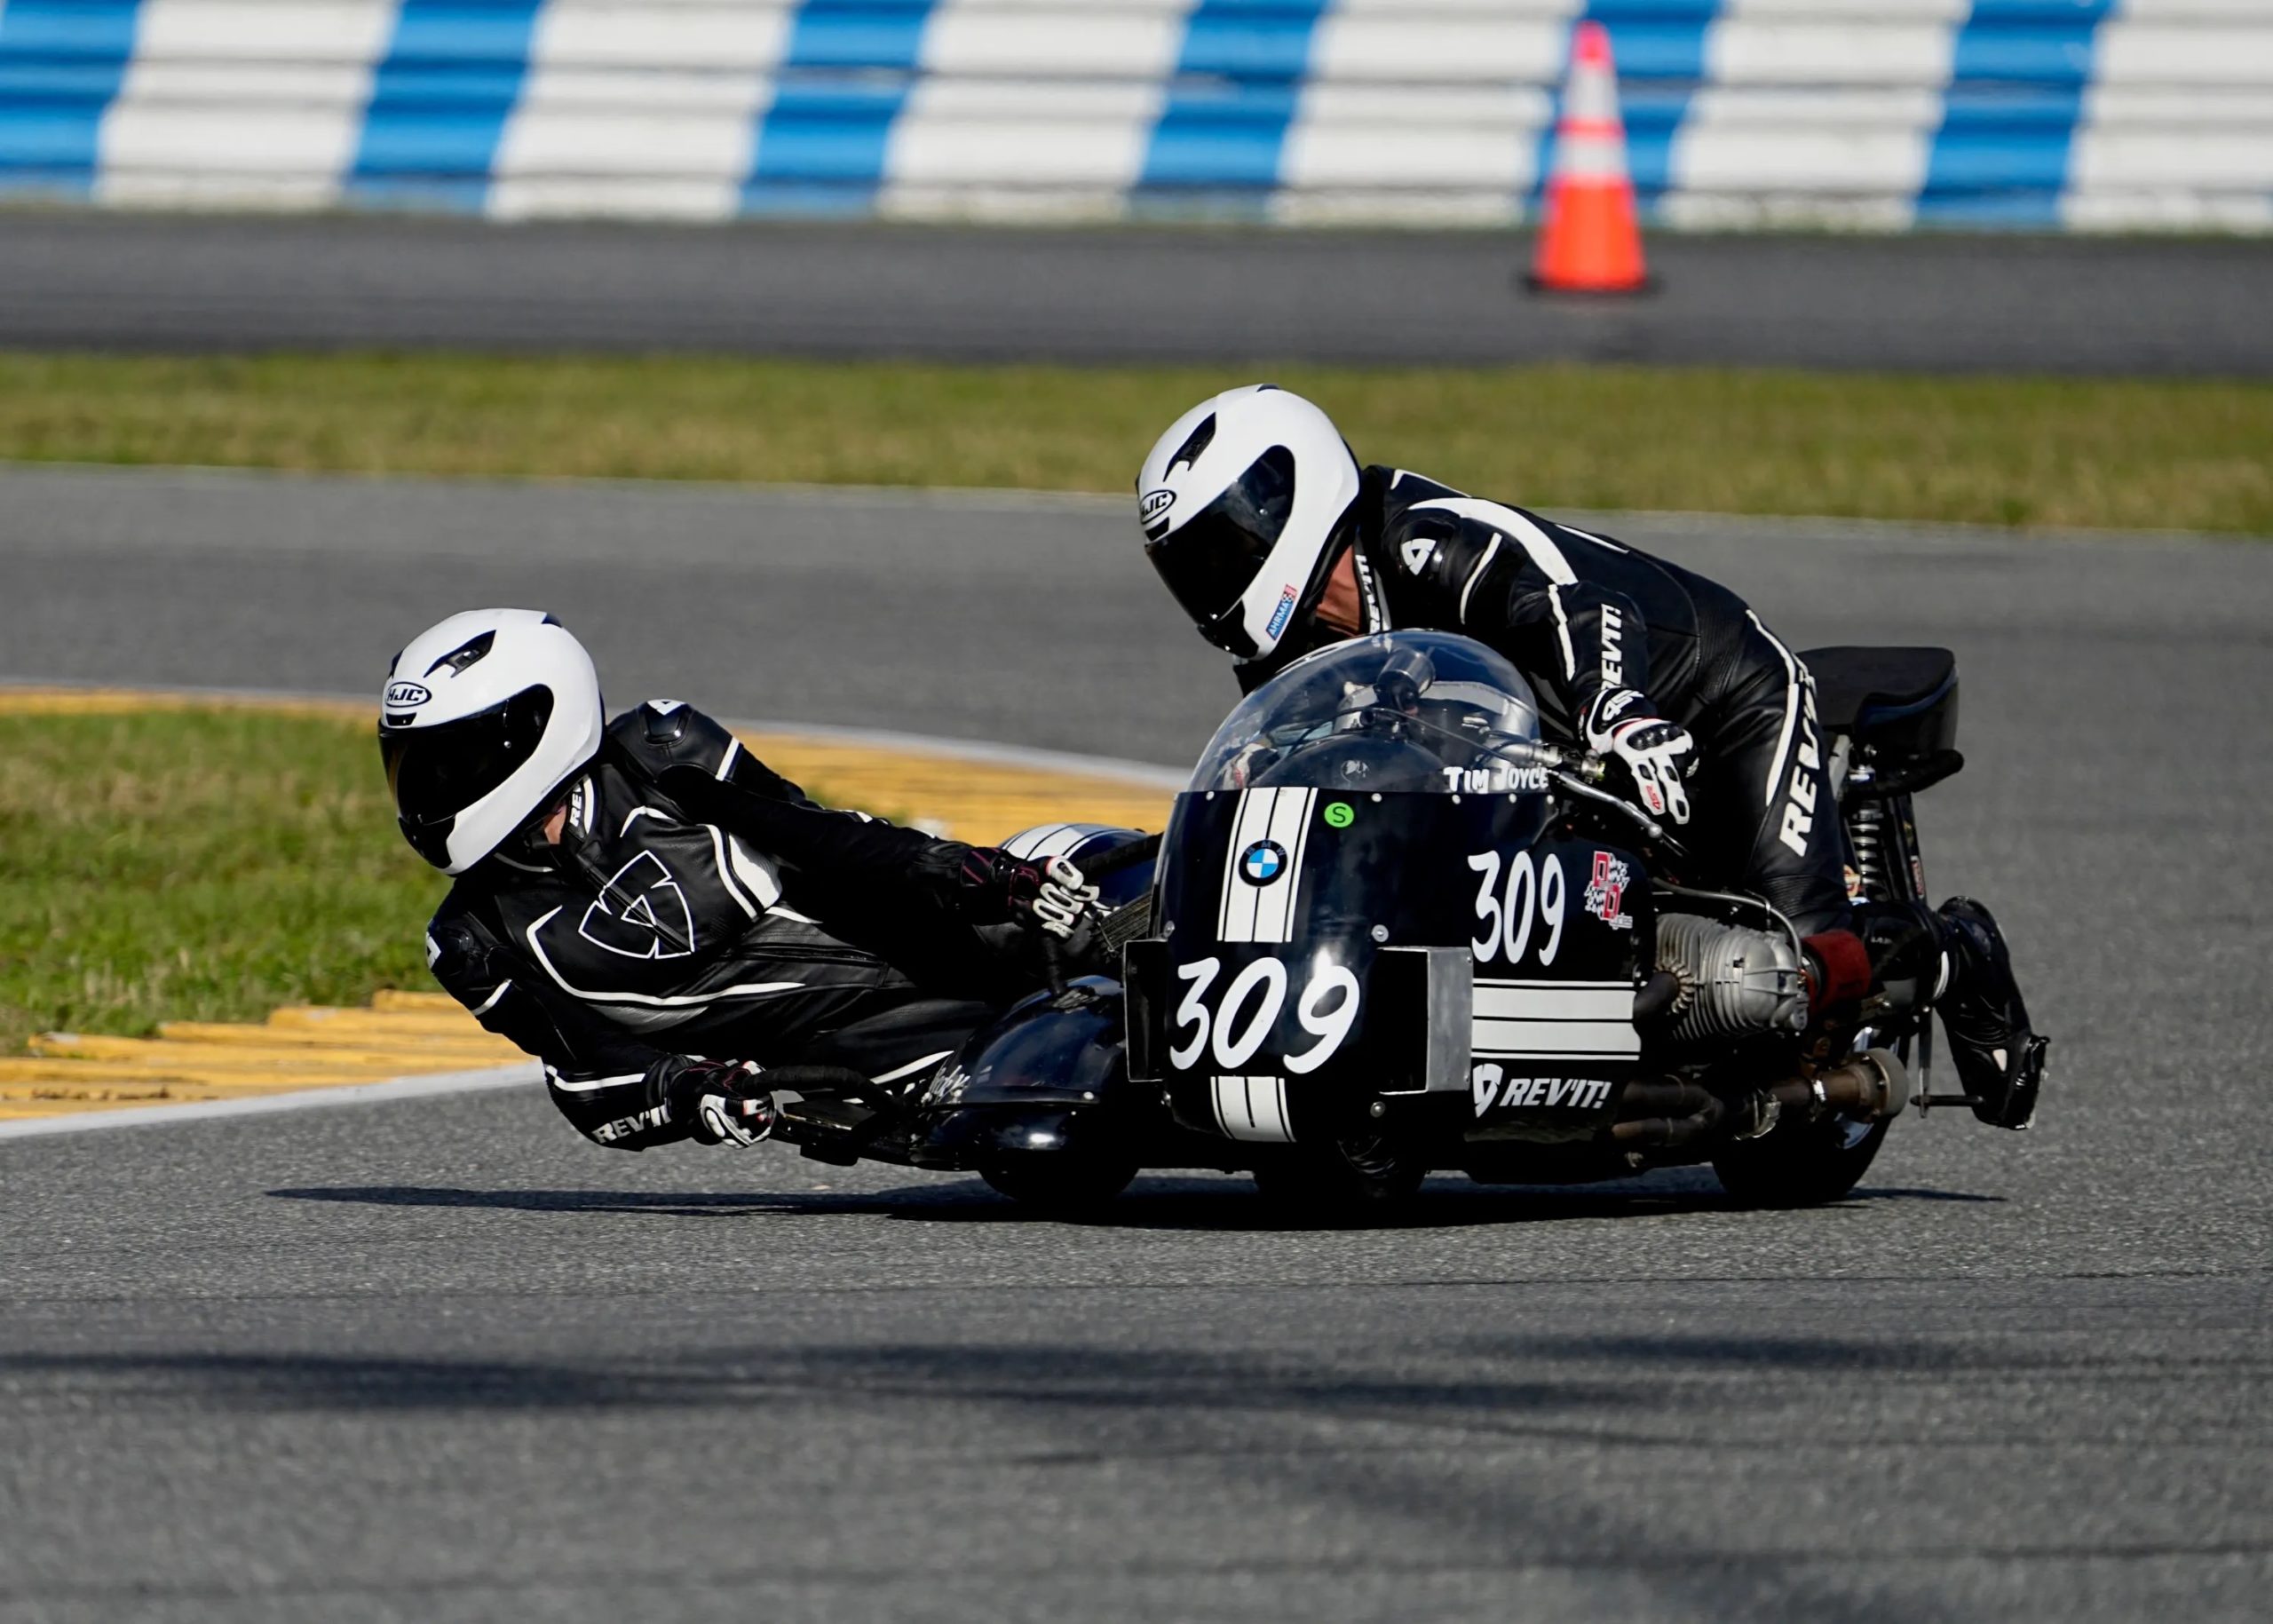 A view of sidecar racing which will soon be ready at Daytona speedway